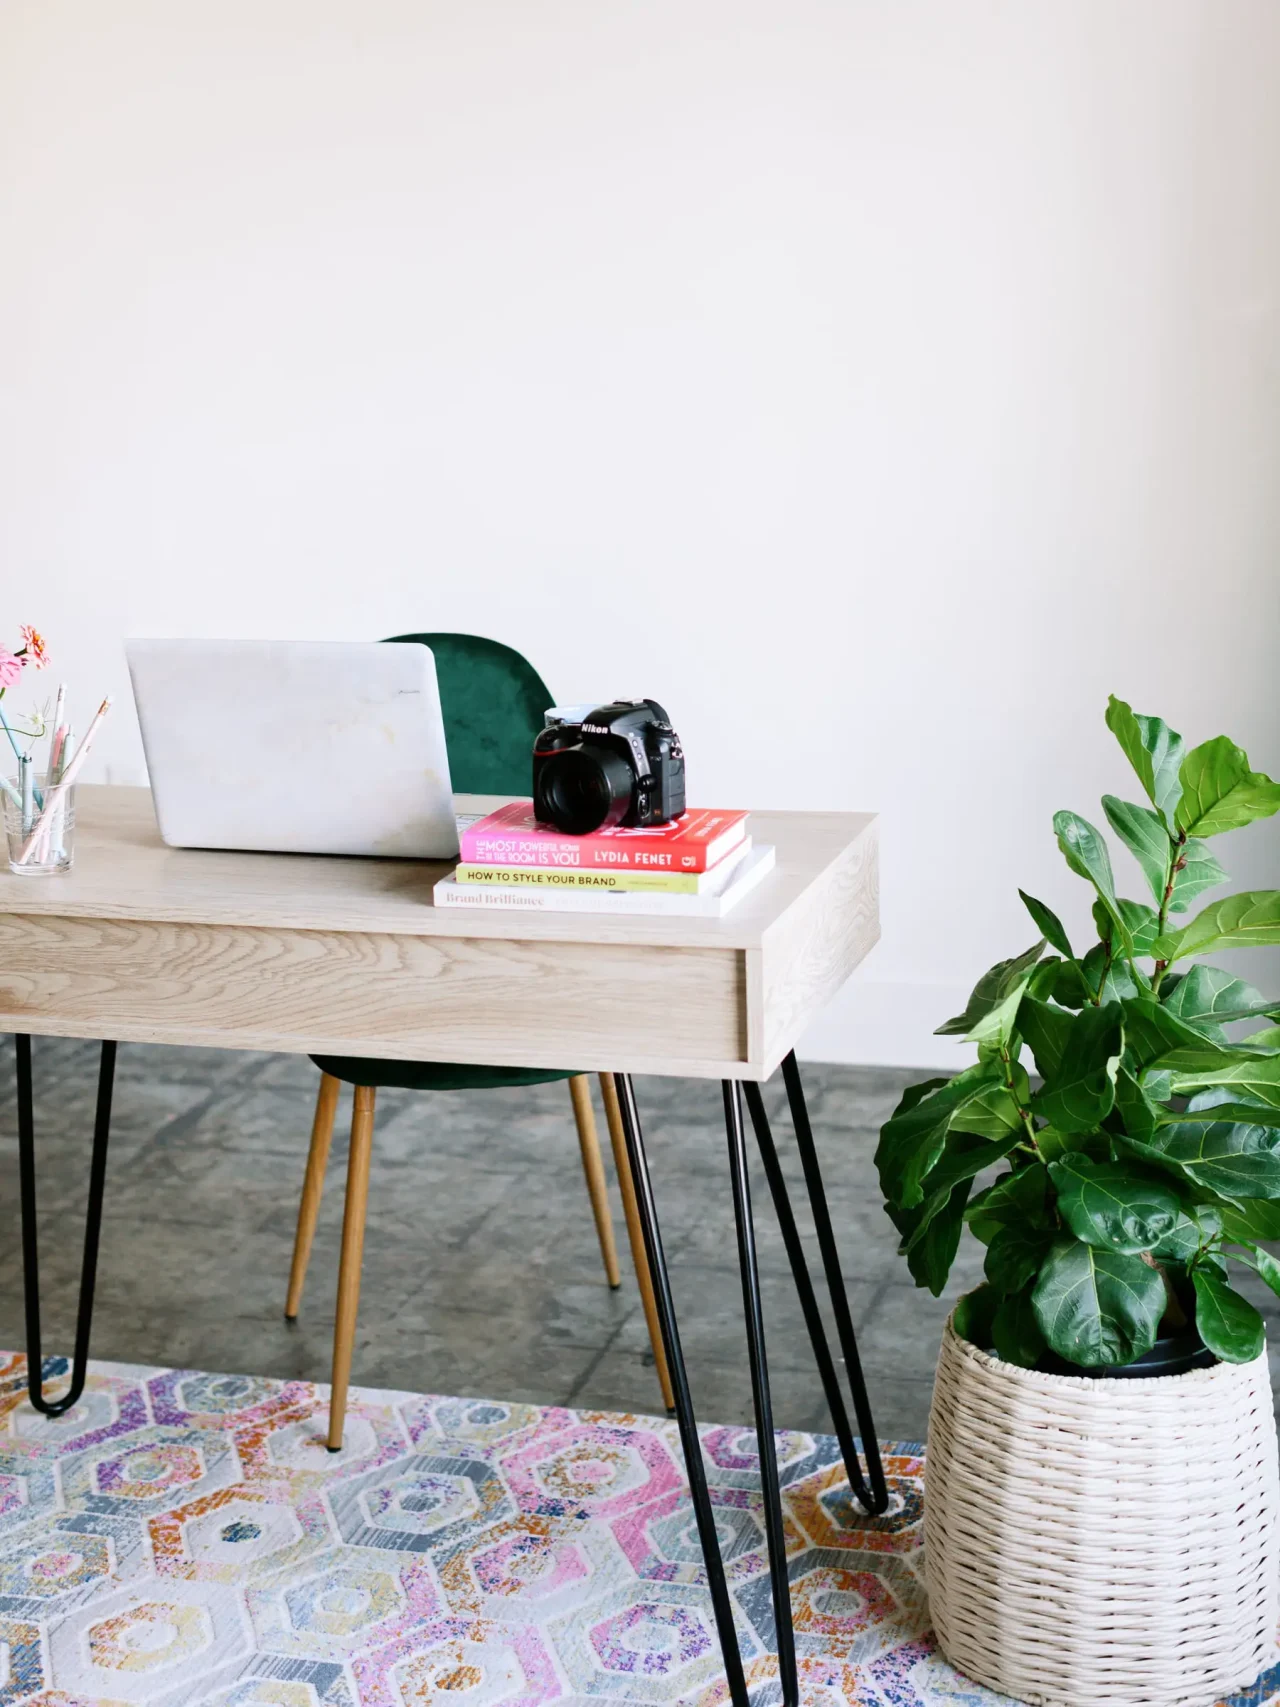 Creating a home office using a room you already have